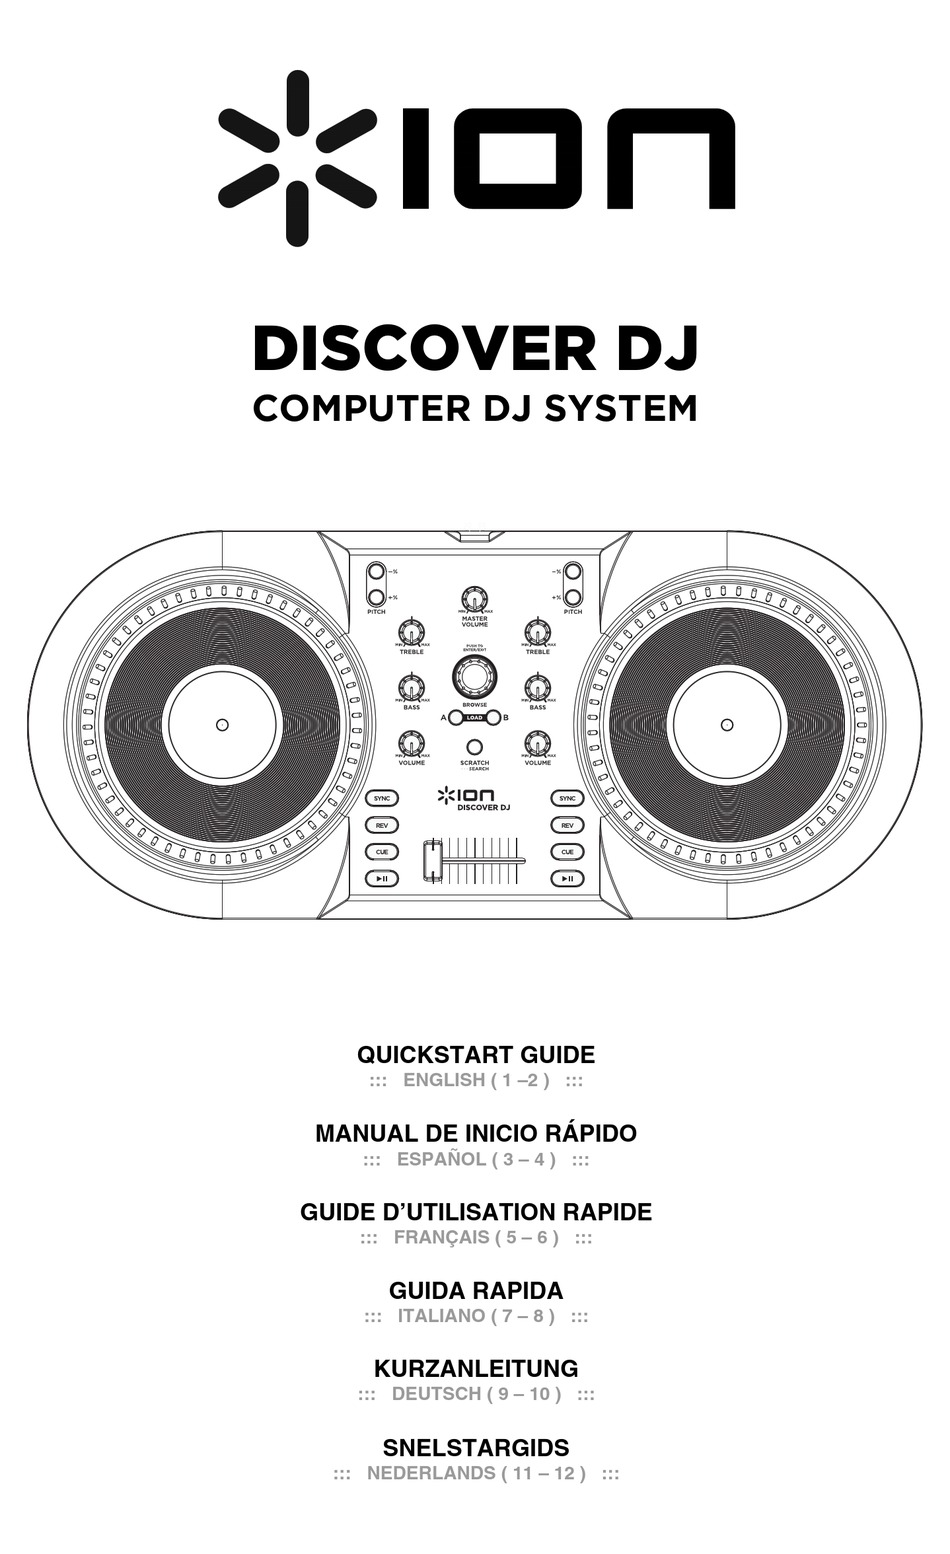 how to install ion discover dj